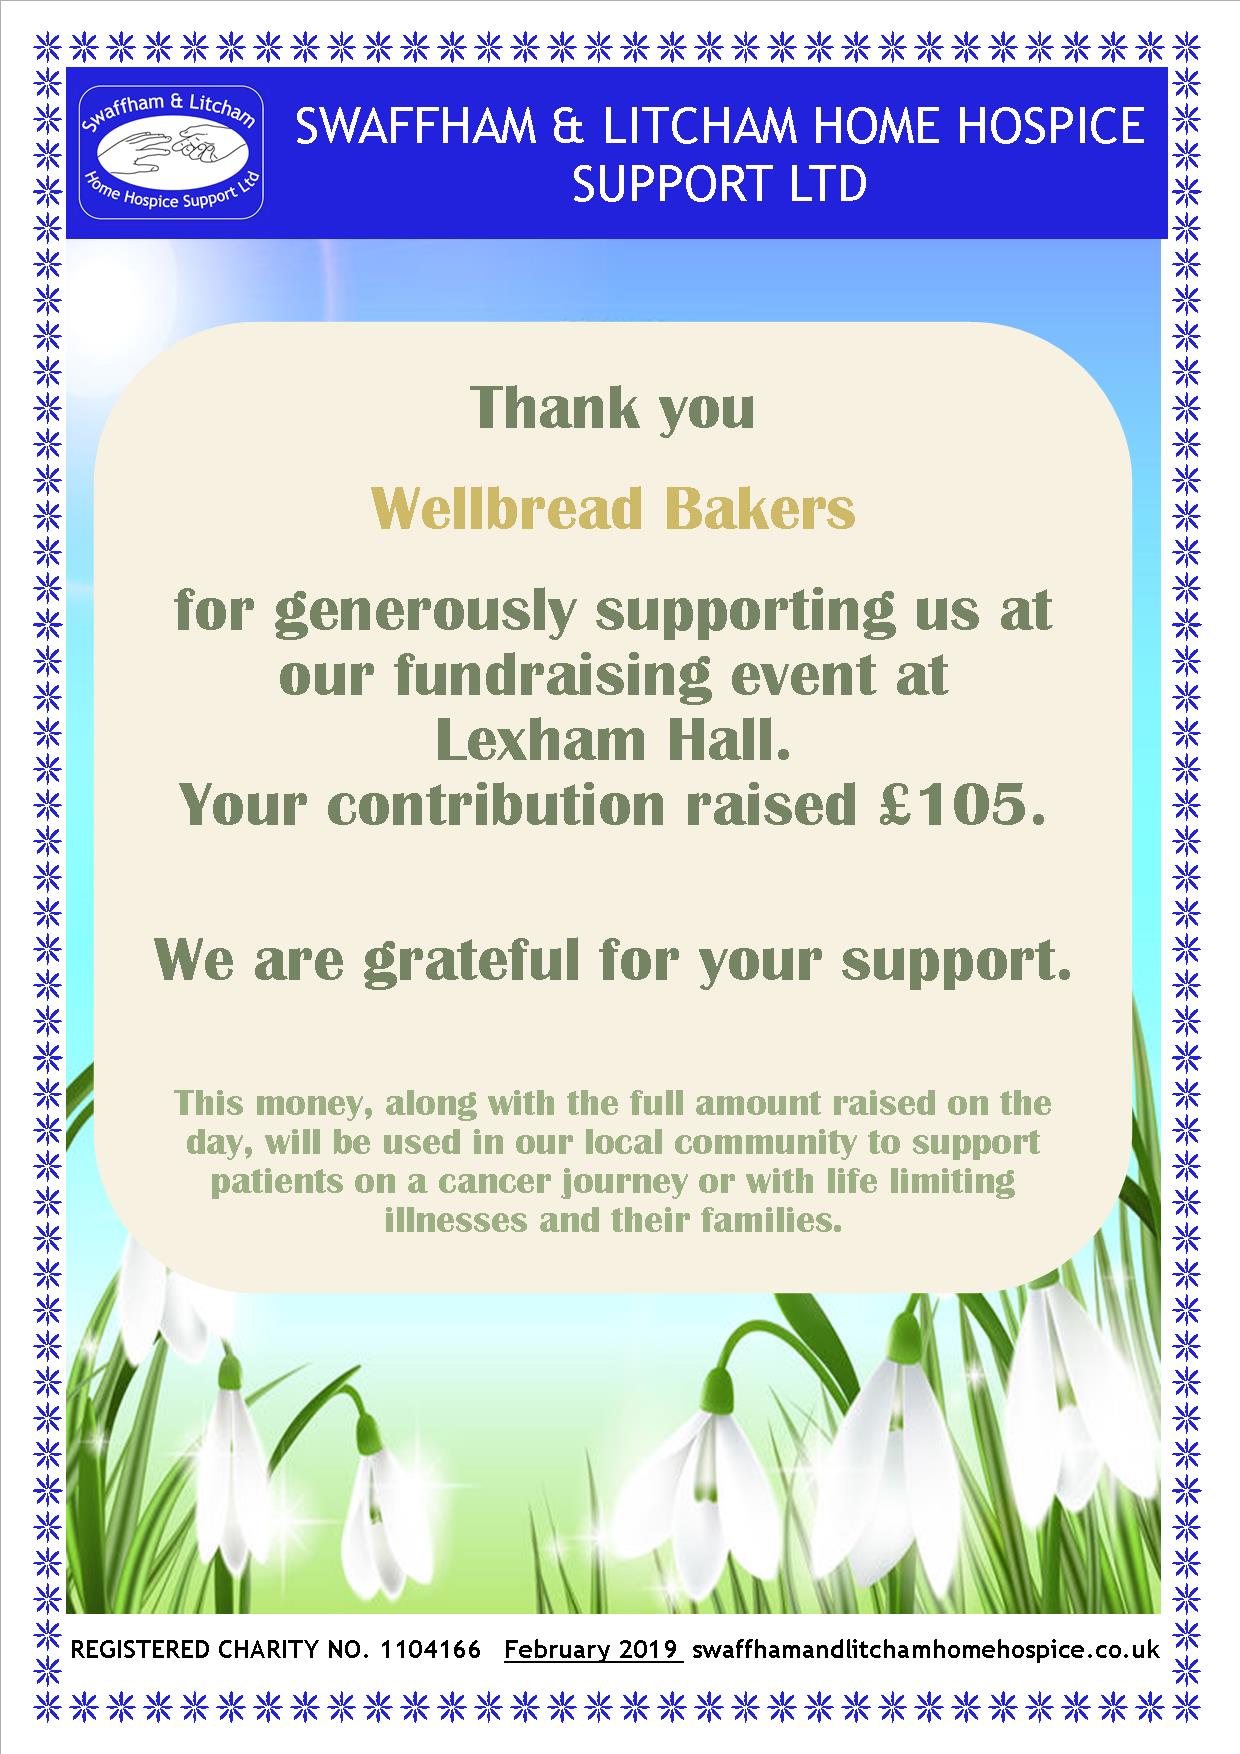 Thank you for supporting our Snowdrop Walk fundraising event at Lexham Hall, February 2019’